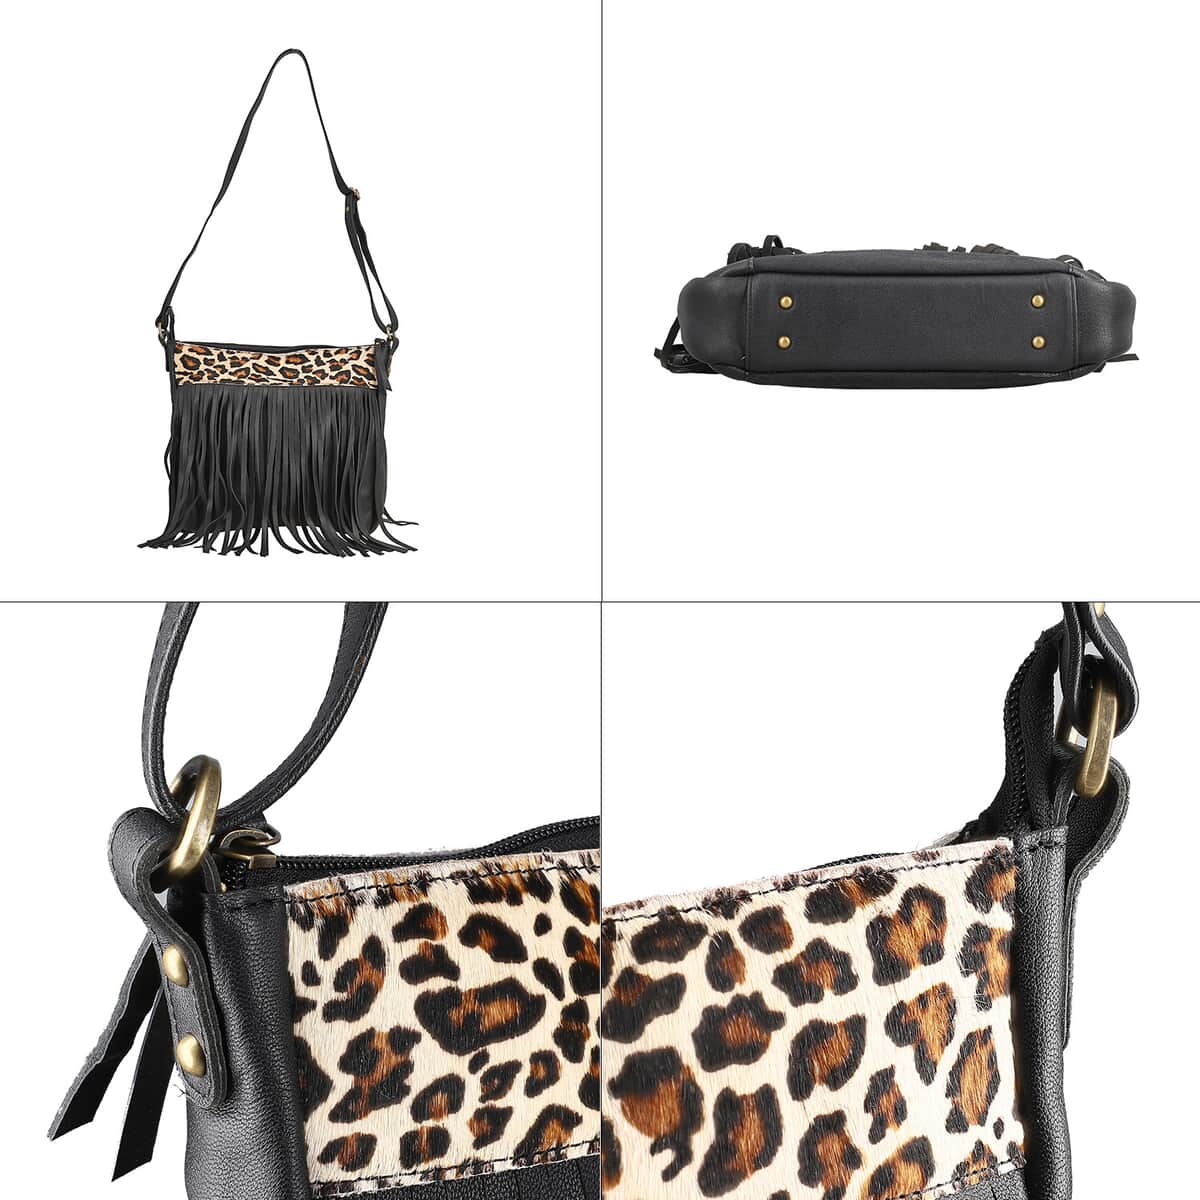 Black Genuine Leather Leopard Print RFID Messenger Sling Bag (12"x1.5"x11") with Fringes and Leather Earrings image number 6